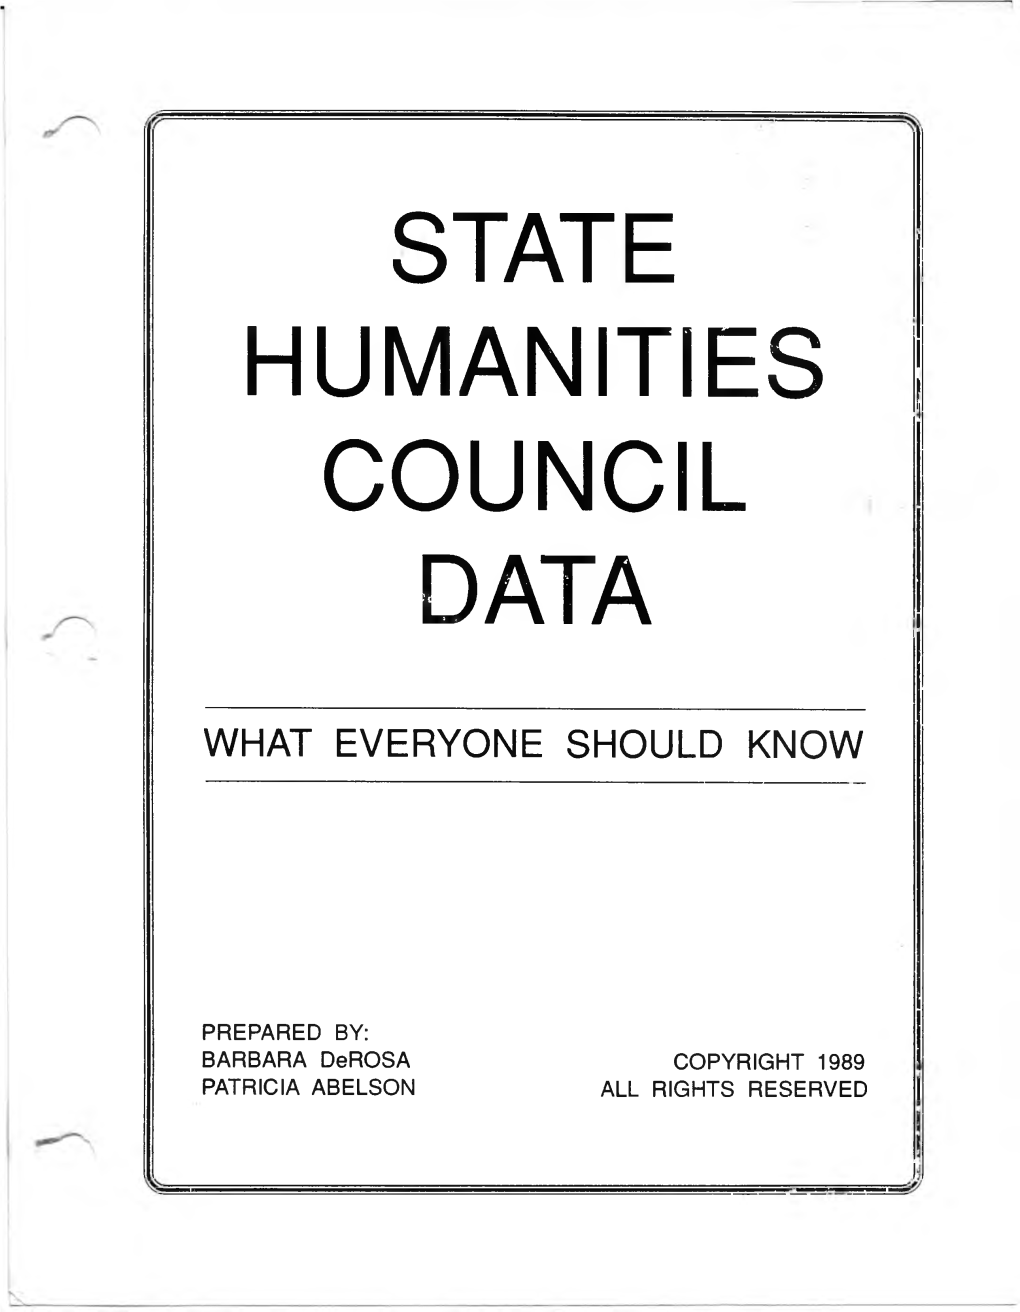 State Humanities Council Data